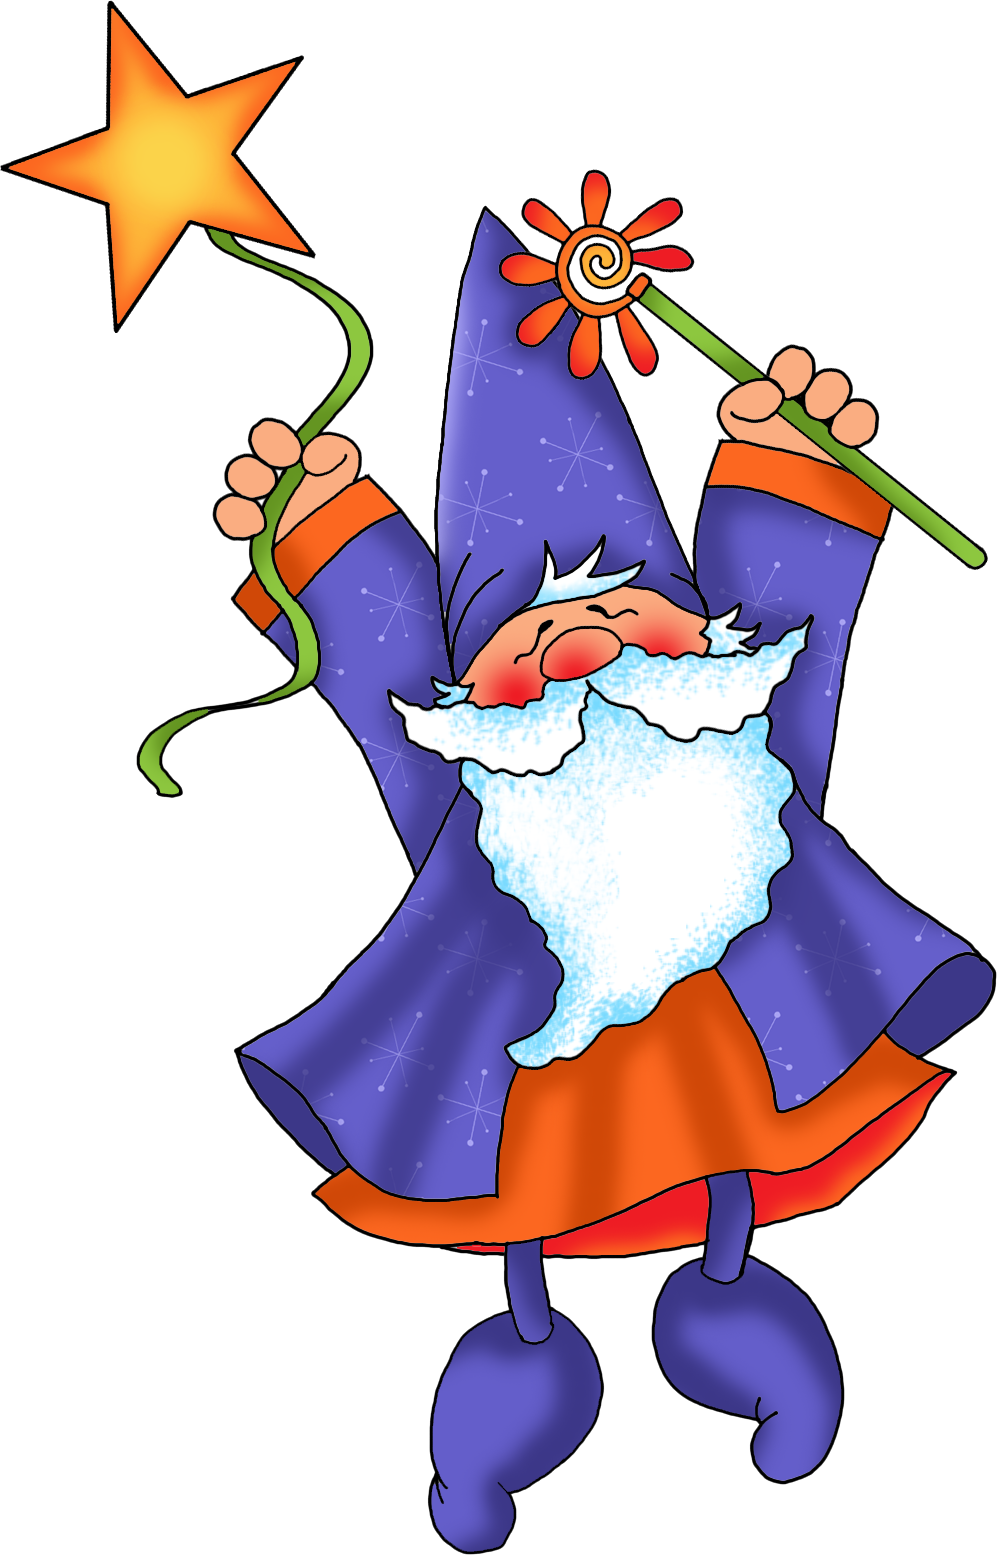 Gardening clipart welcome home. Coleccion wizard wand png